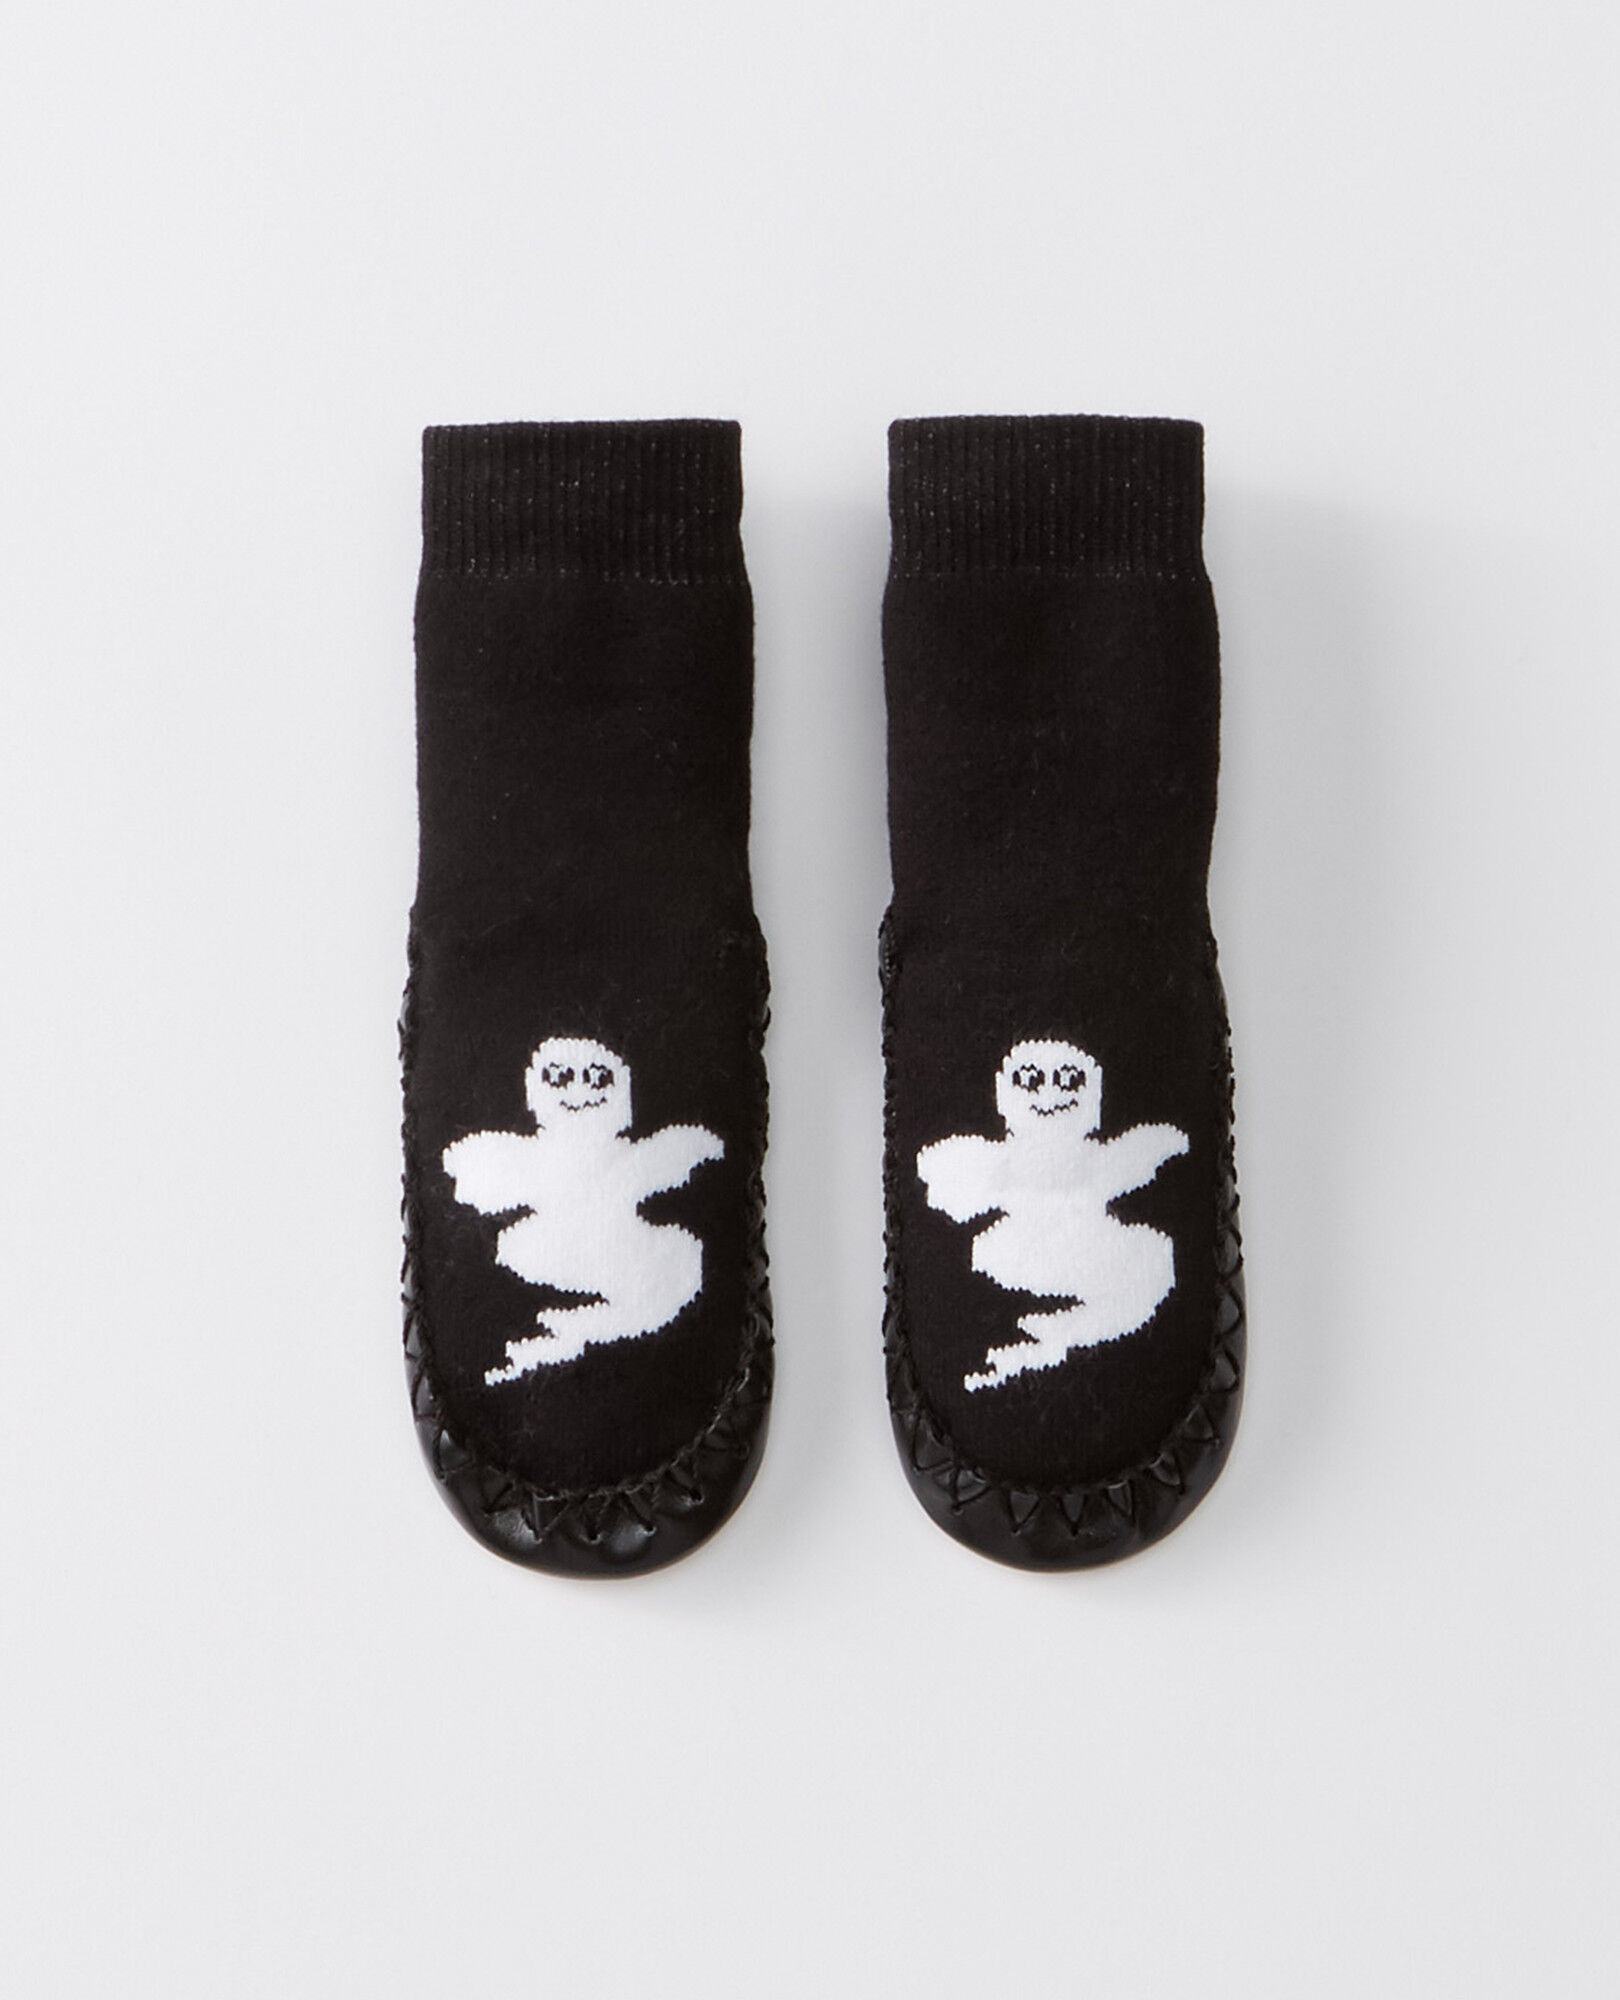 hanna andersson slippers